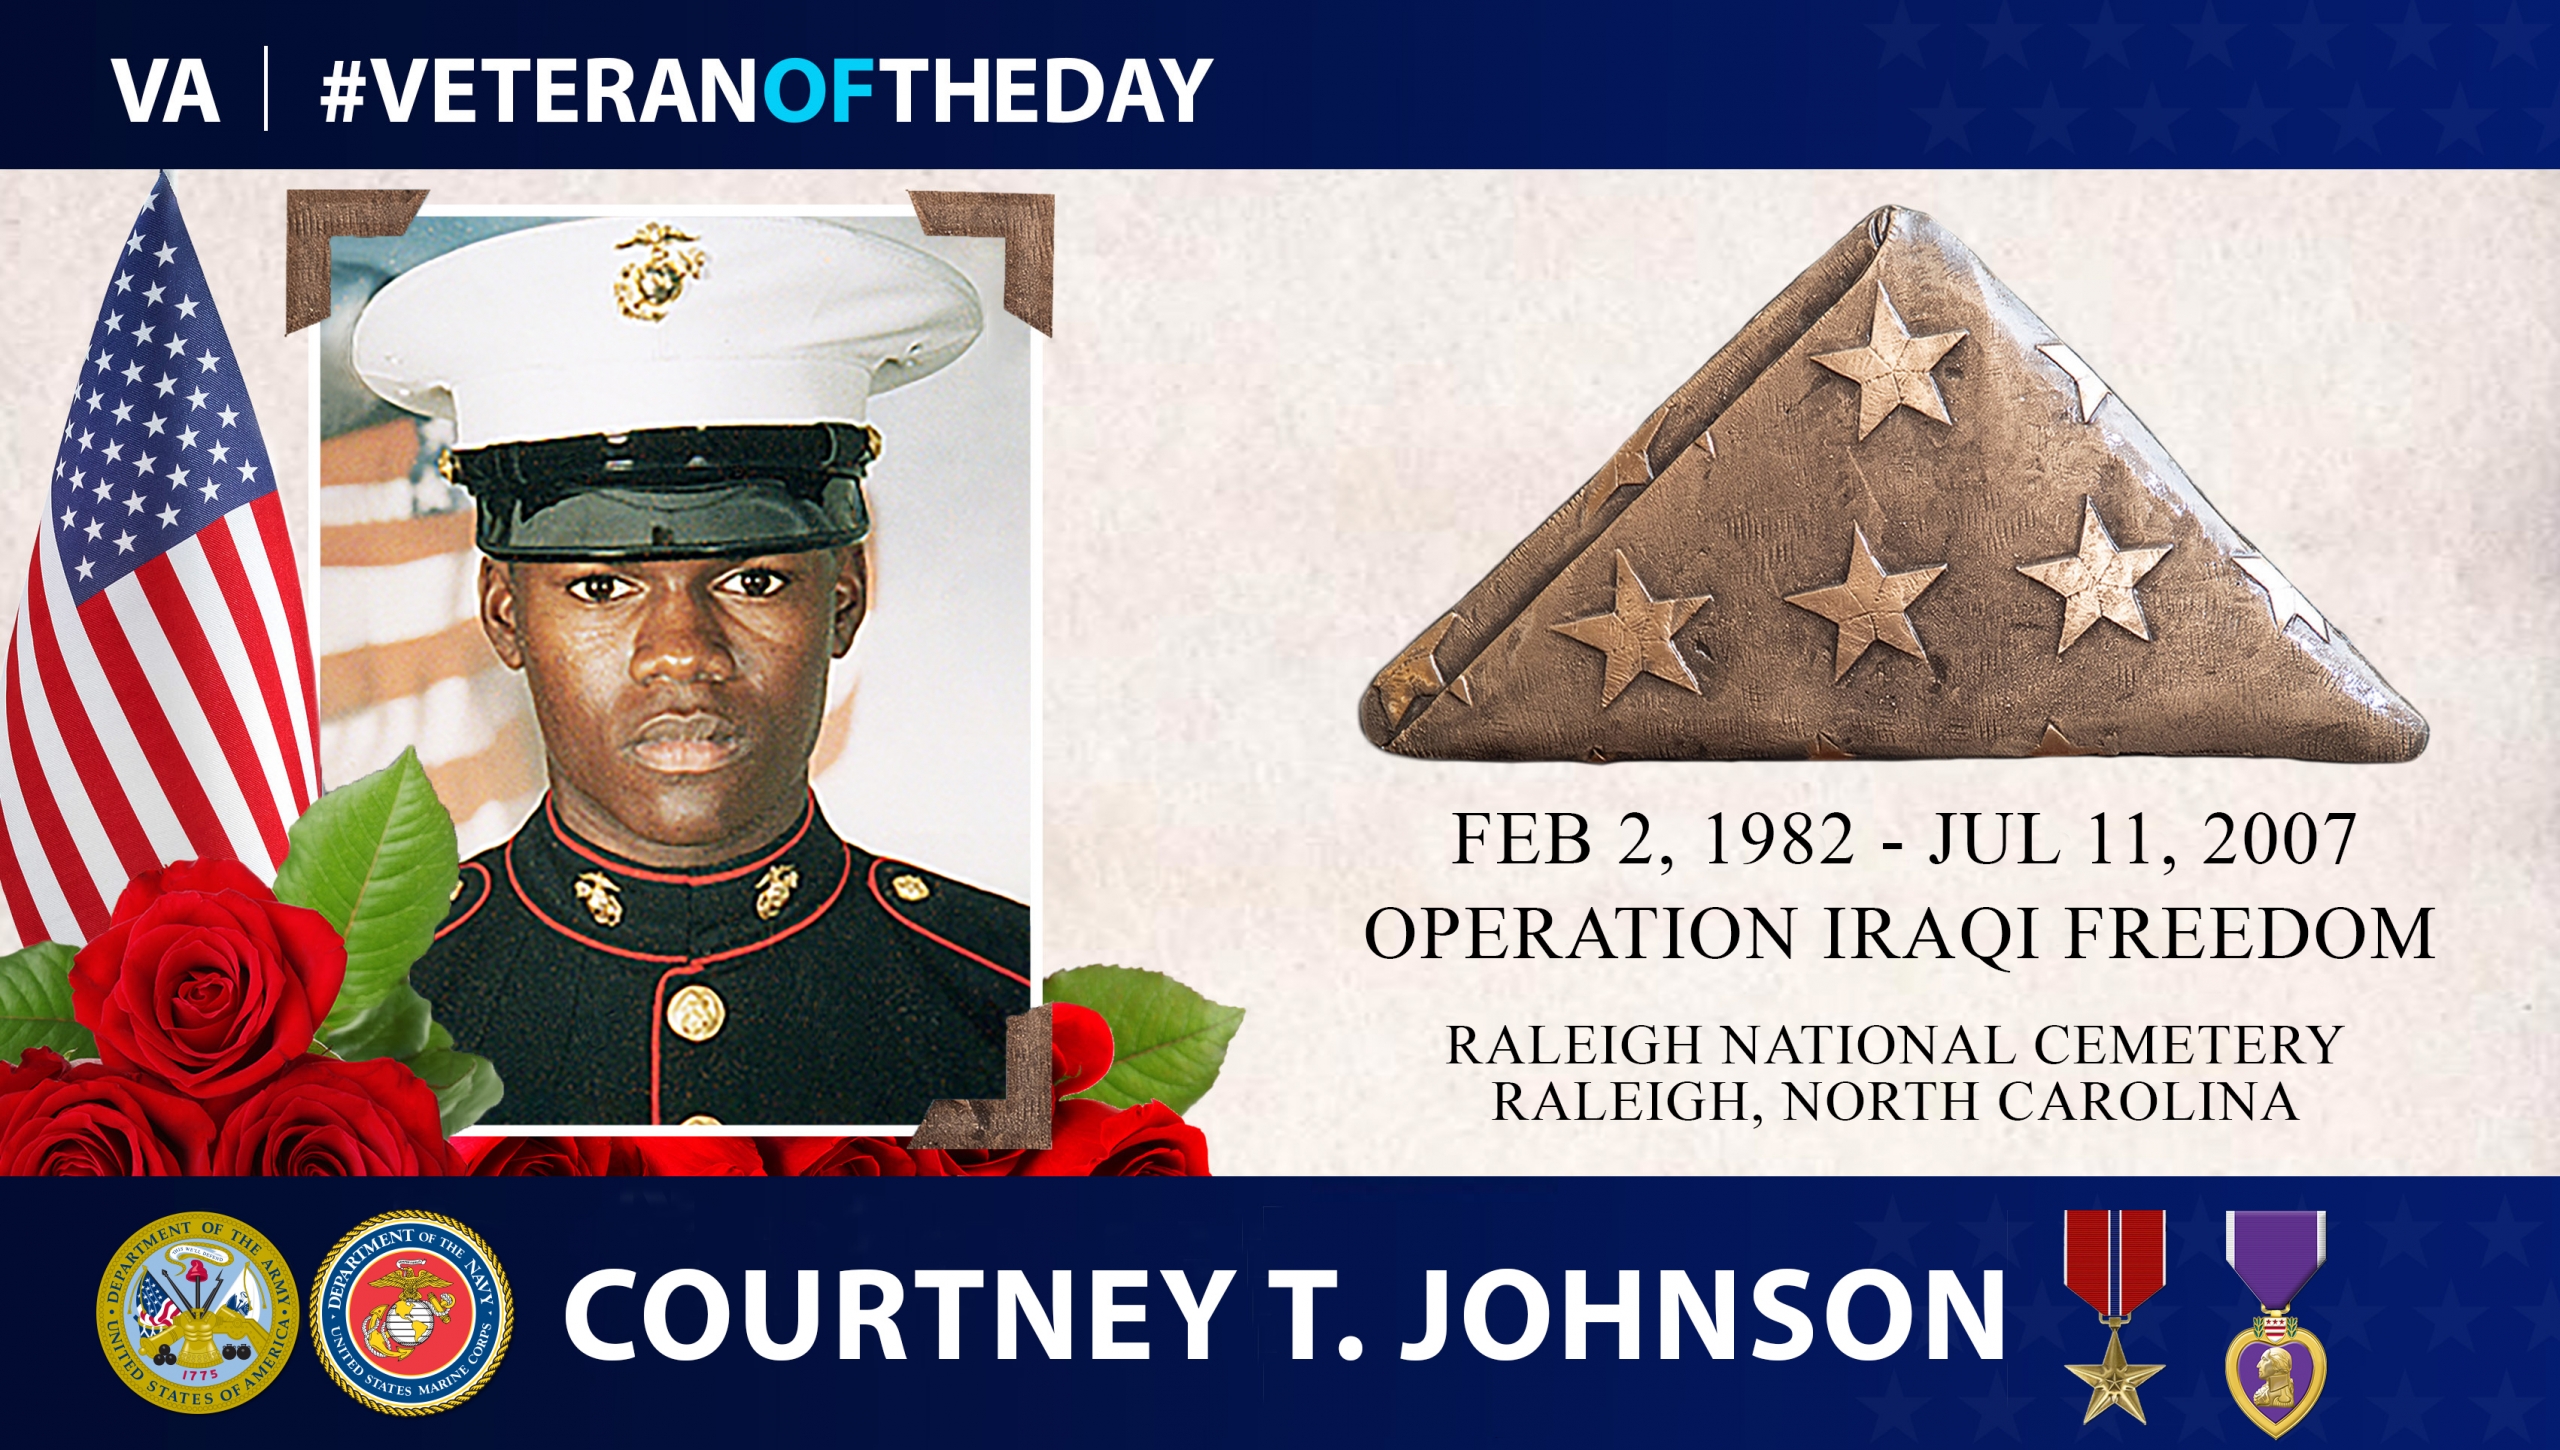 Today’s #VeteranOfTheDay is Marine Corps and Army Veteran Courtney Tremayne Johnson is today’s Veteran of the Day.